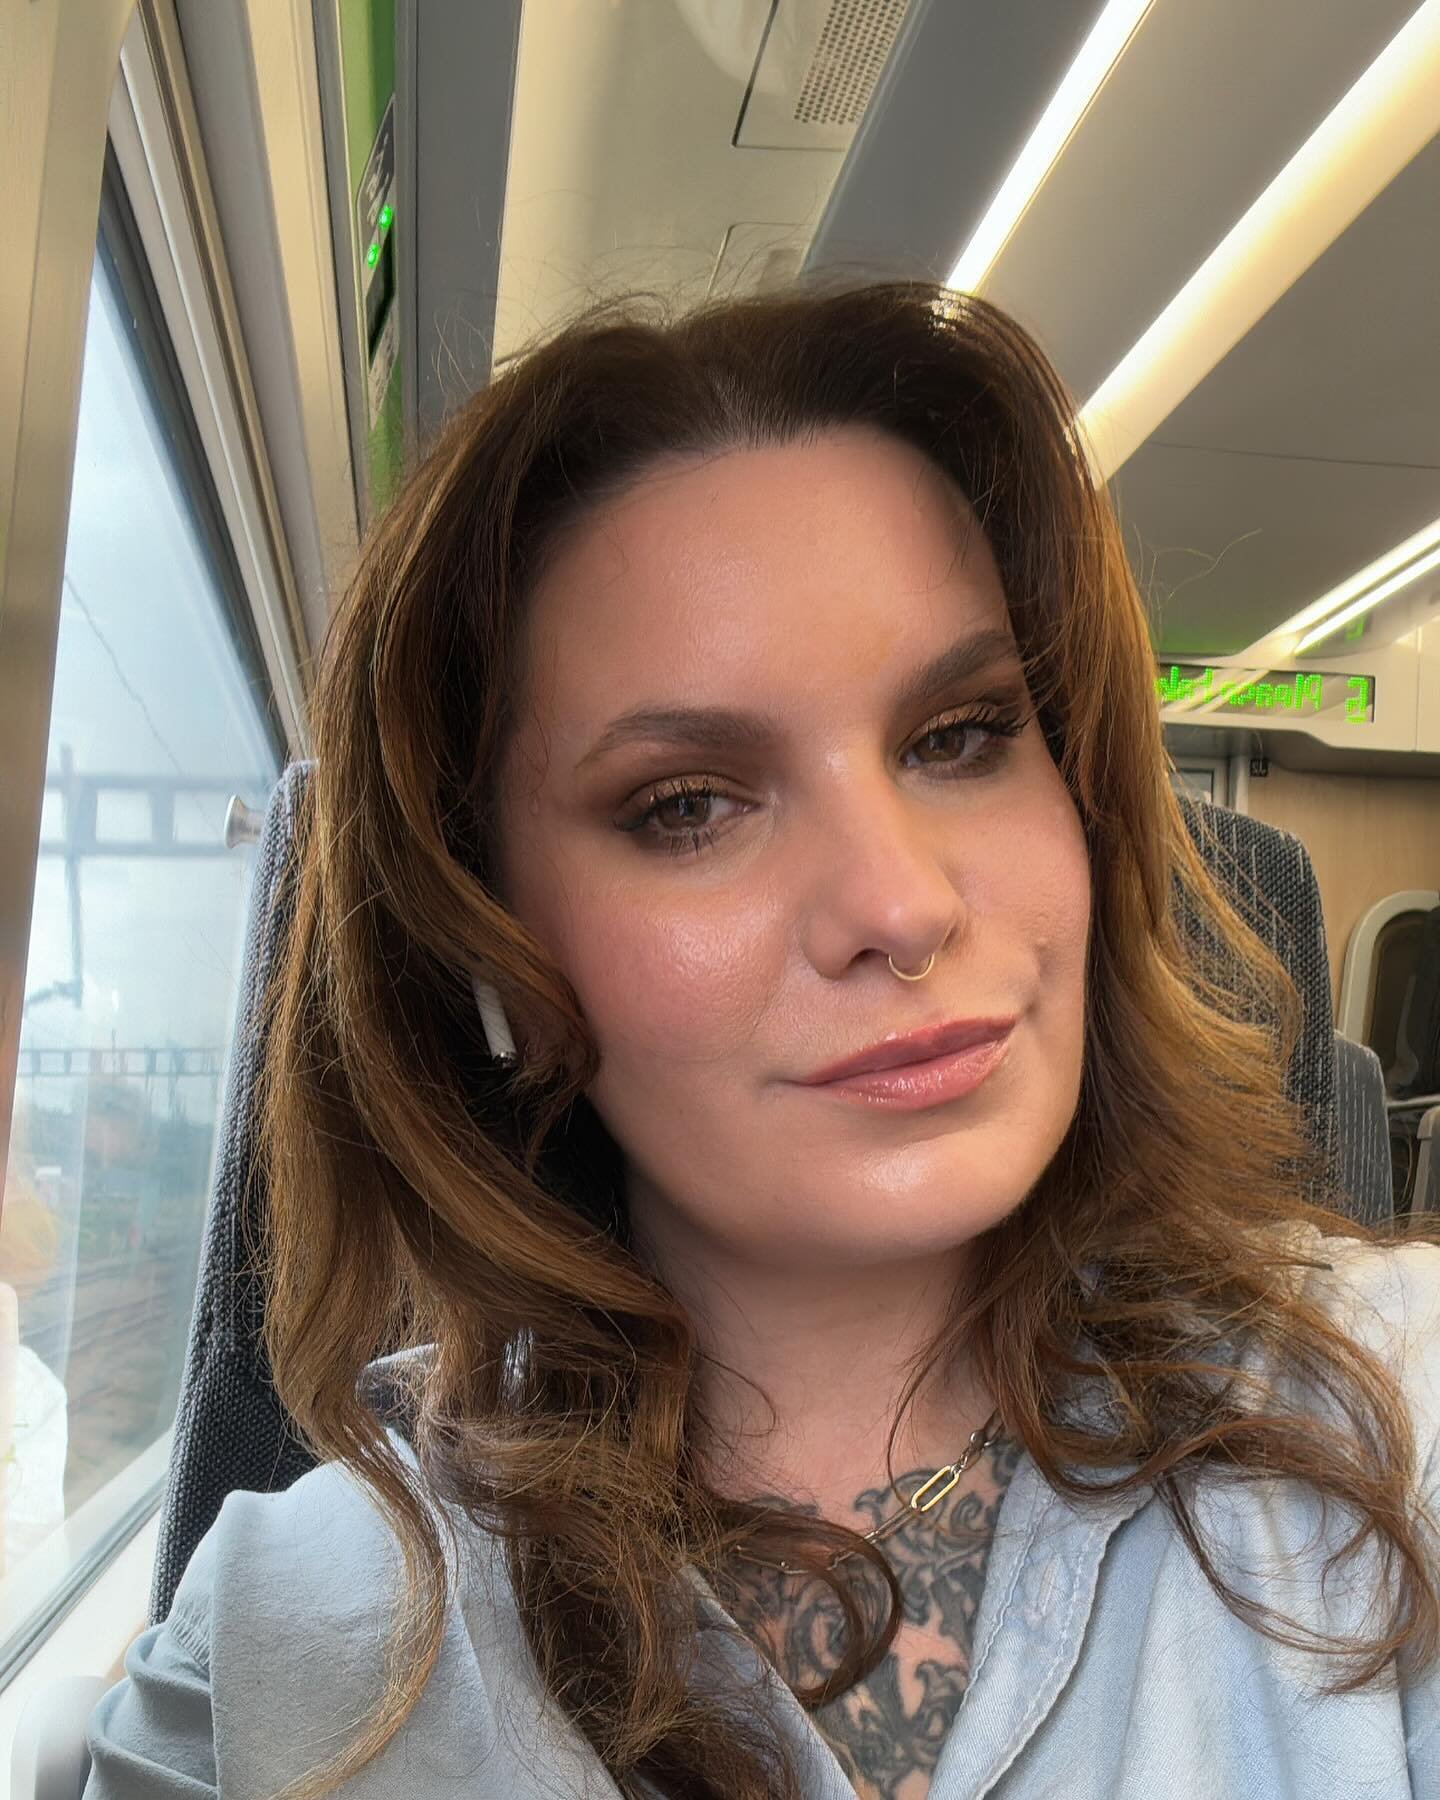 April 🗑️ ✨🖤🫶
1 First train to London ovs there was a GRWM
2 Magnus 👅 
3 Endometriosis MRI journey continues 
4 @tatcha with babes @lisapotterdixon @carolinebarnesmakeup @by.sarahkate we didn&rsquo;t get a pic
5 Sunset rides home back to Somerset 